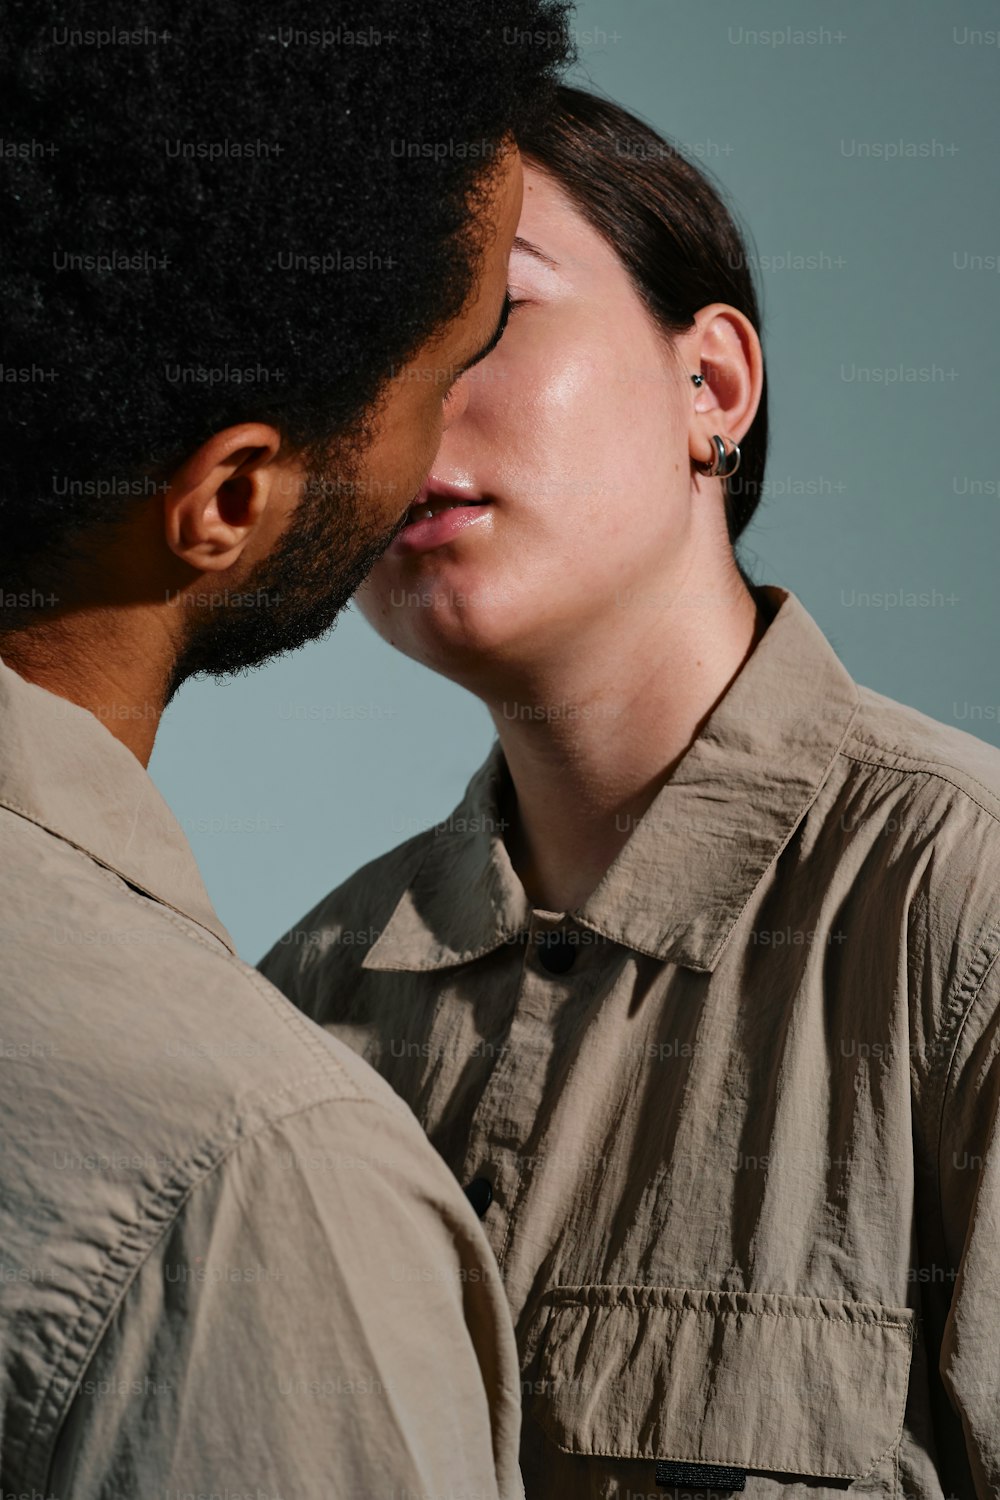 a man and a woman kissing each other